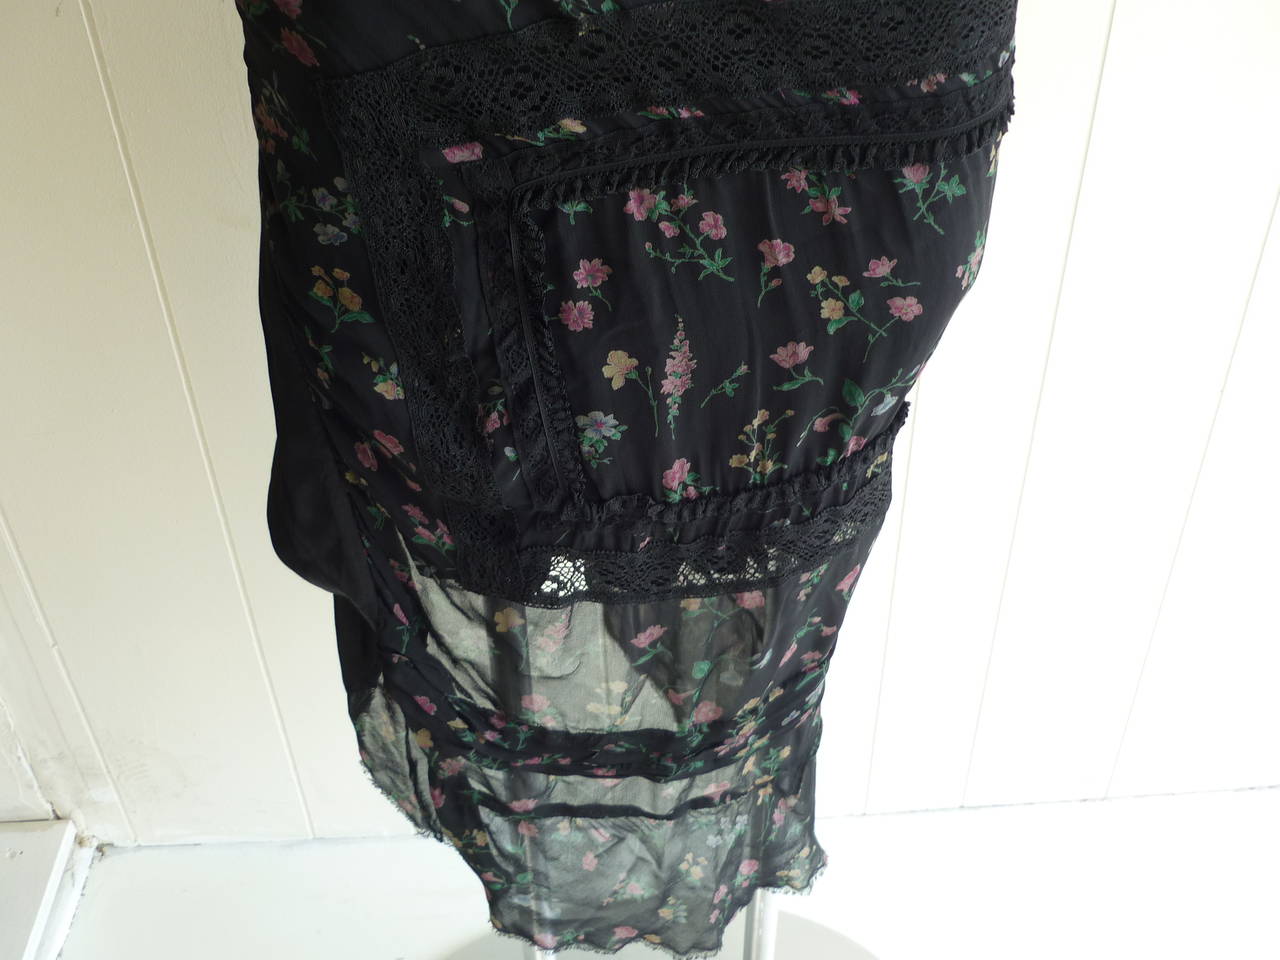 An intricate piece to describe! The skirt is made of 100% rayon. There is an underskirt in solid black and a longer over skirt with a floral pattern, lace trim, stitched pleats and ragged hem.

In addition, the overskirt does not go around but